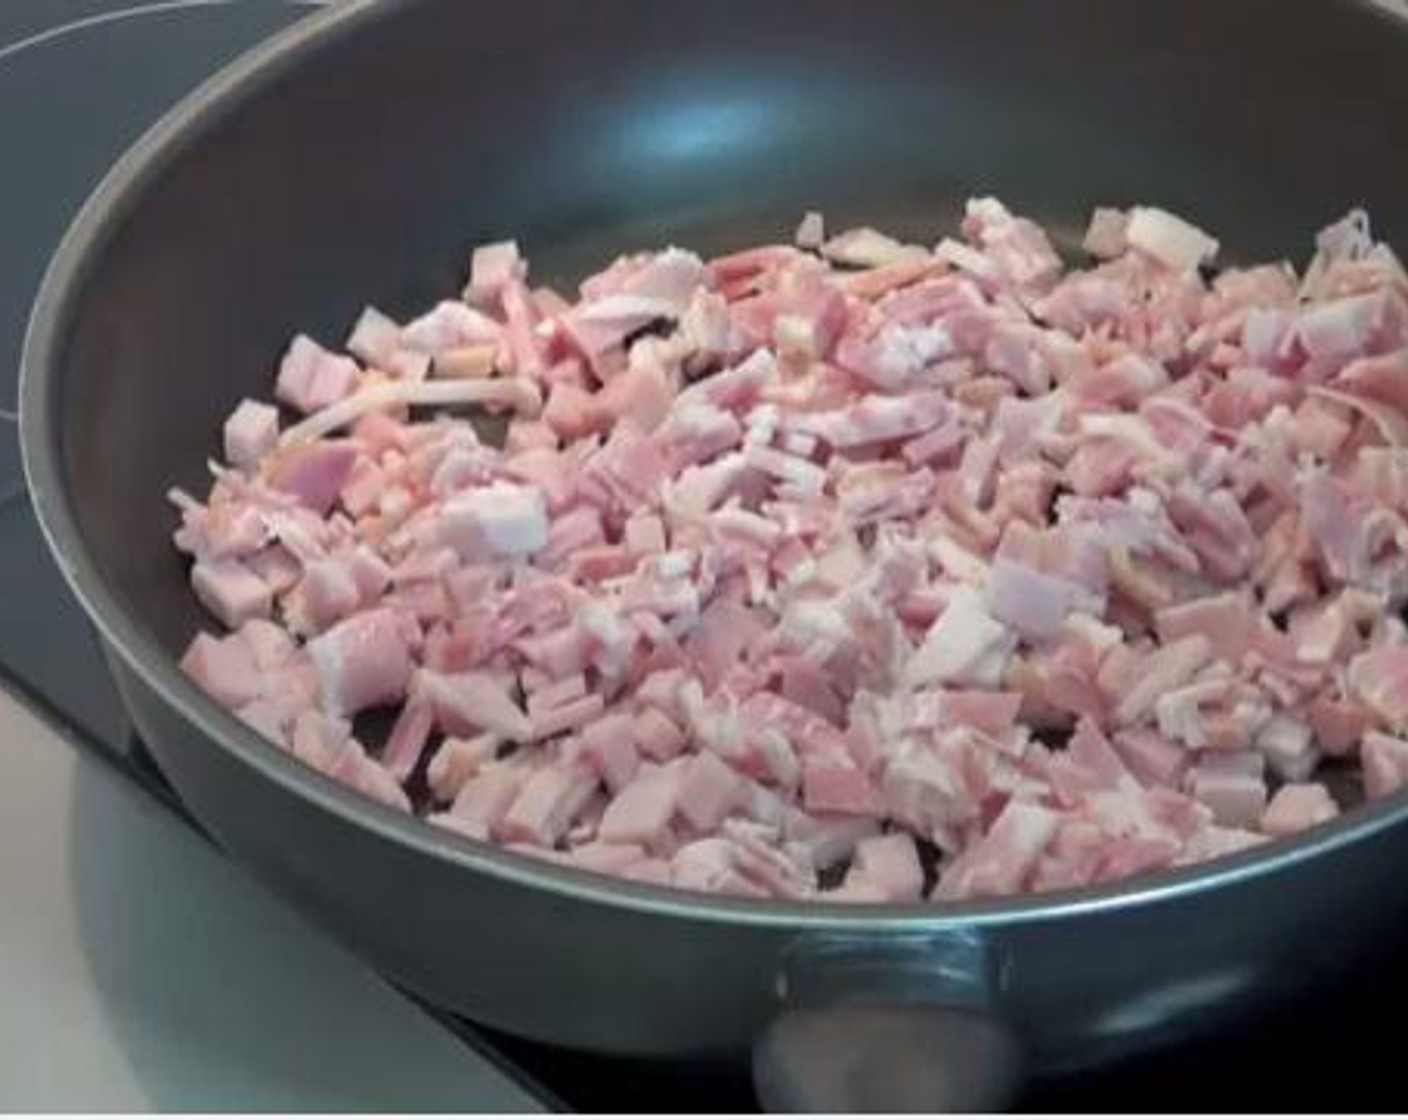 step 2 Fry the Thick-Cut Bacon (8 slices) in a frying pan until they are brown and crisp.